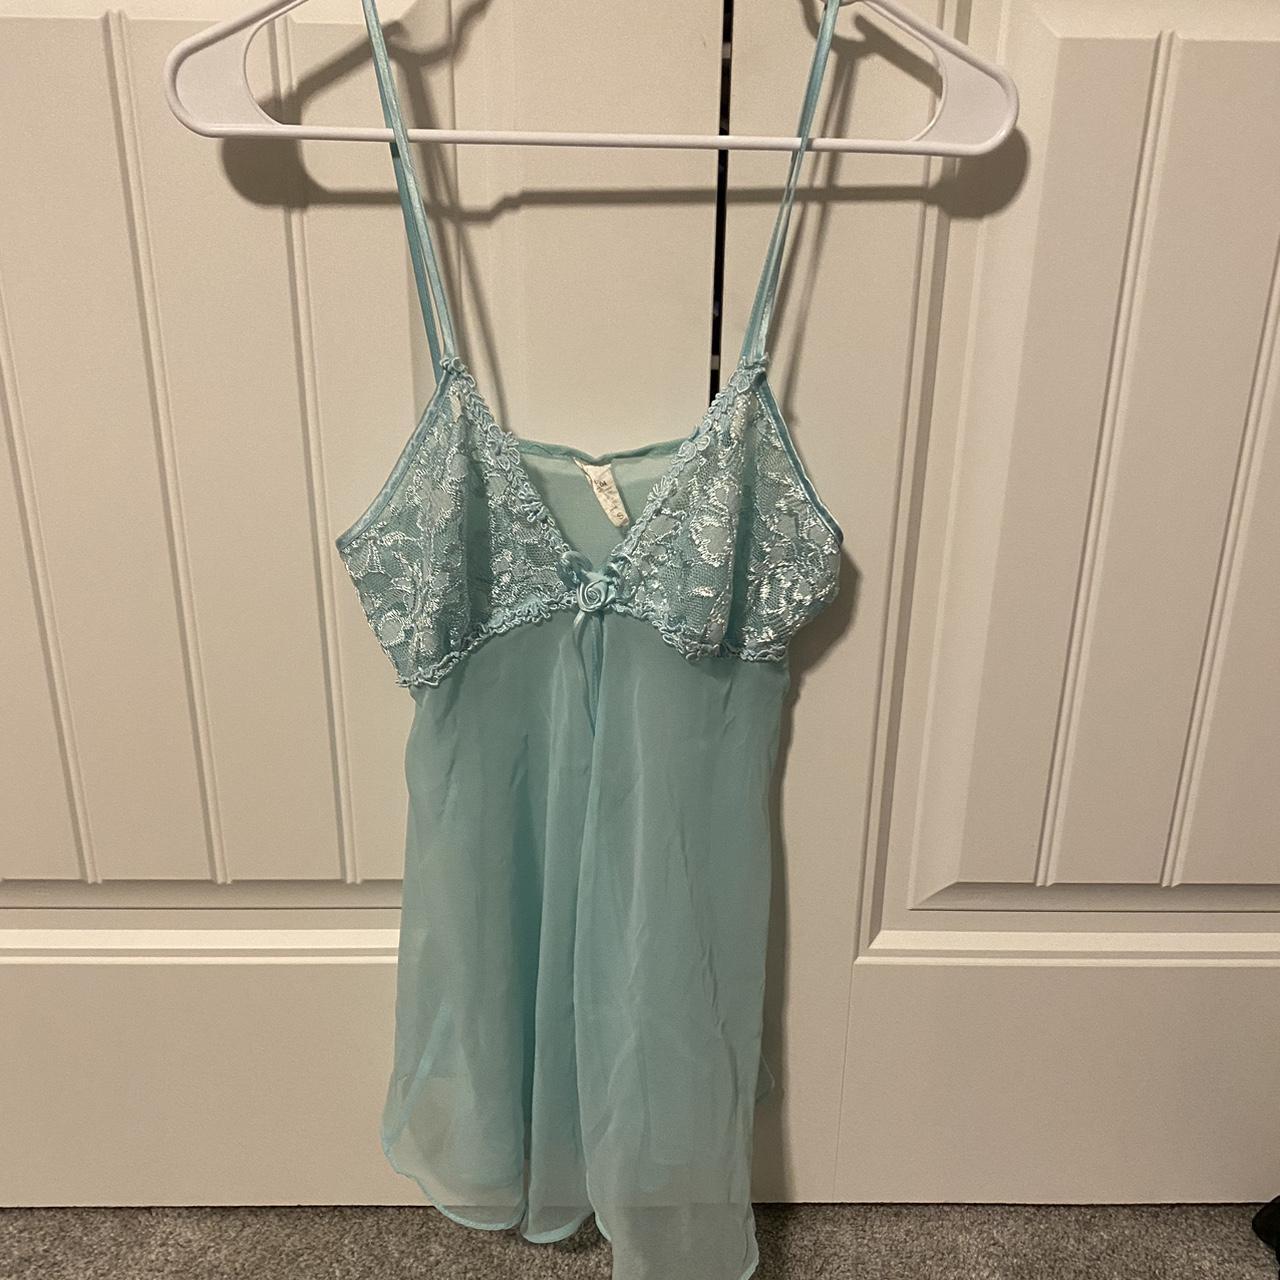 Teal lingerie top it’s splits in the middle Size s... - Depop